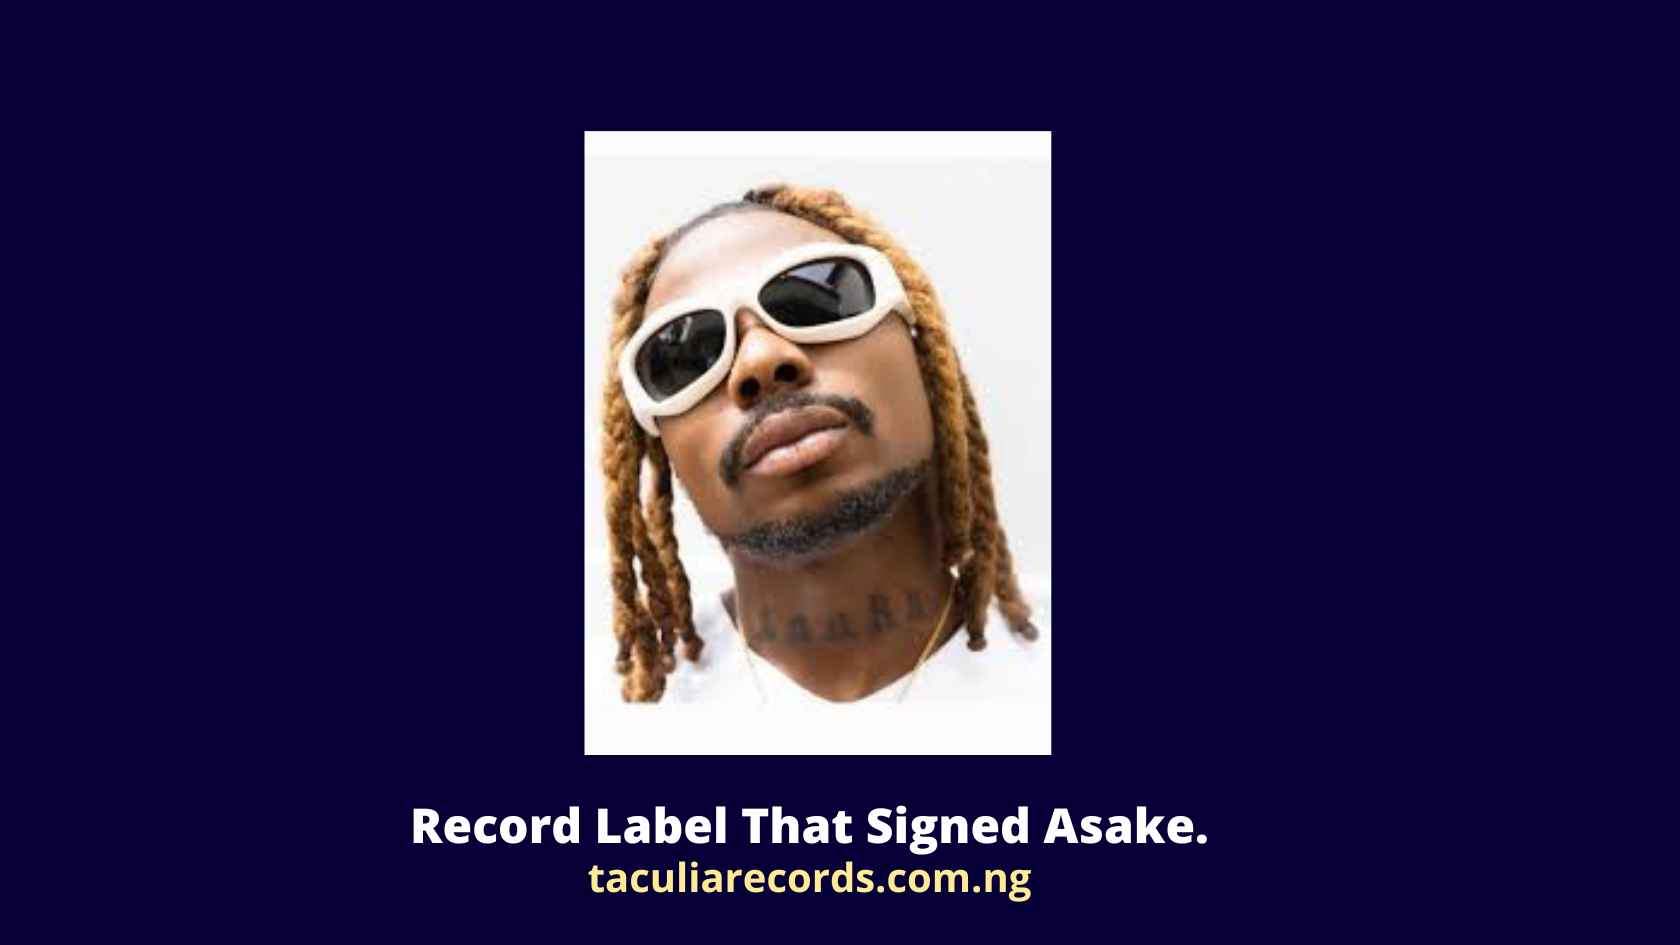 Record Label That Signed Asake.